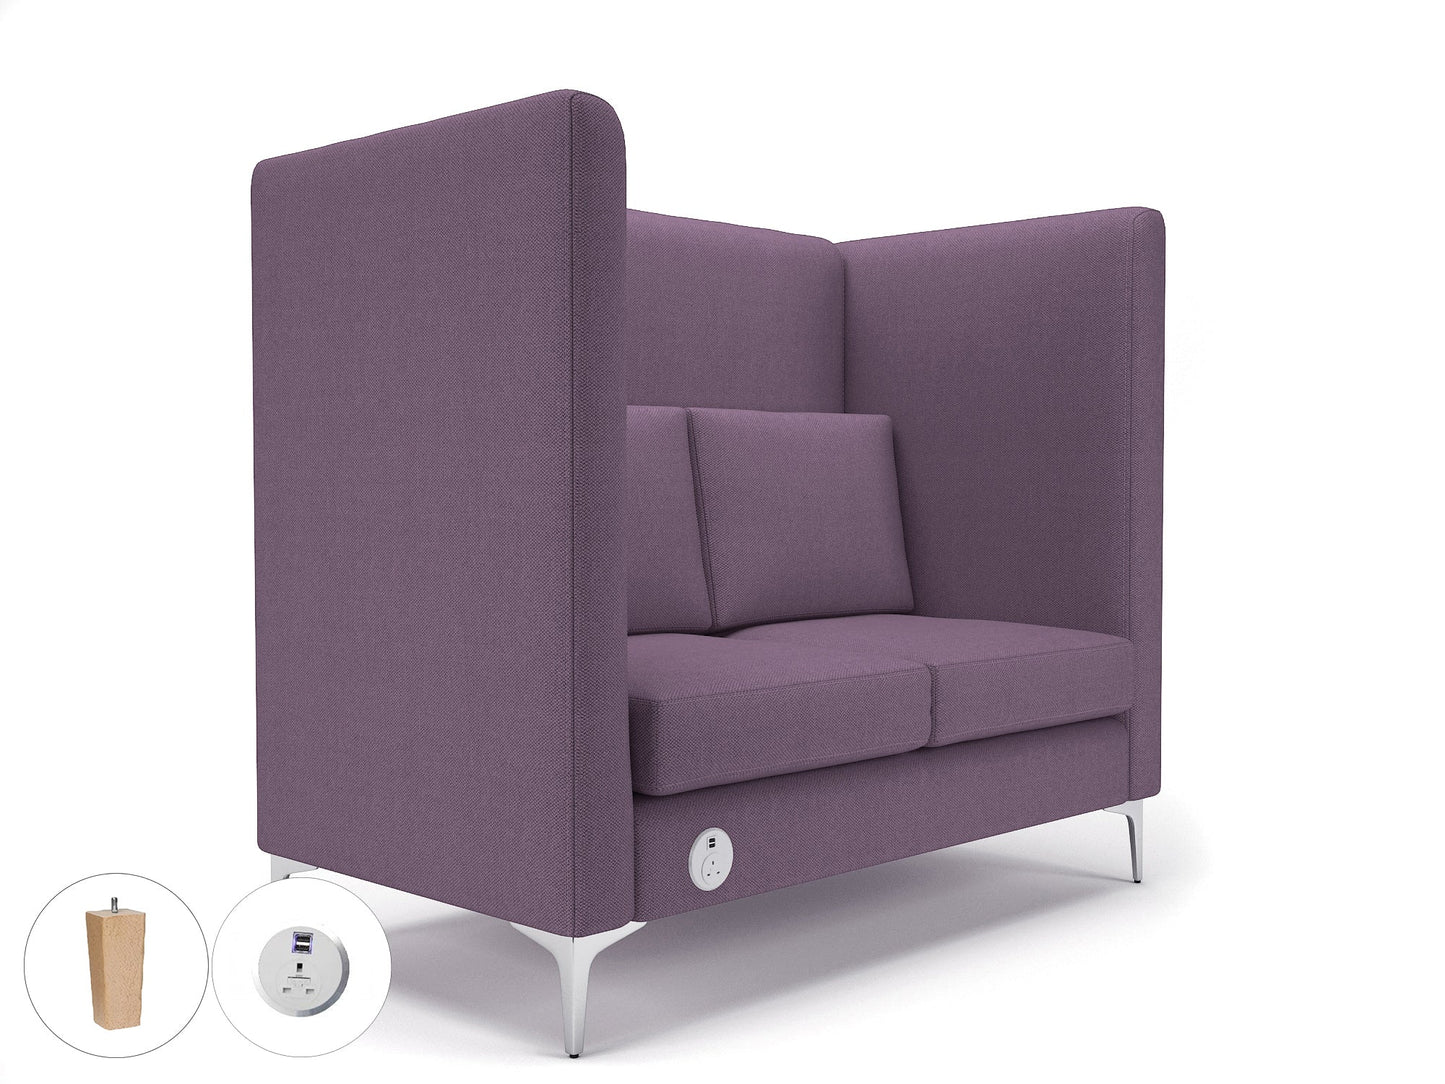 Altus - Wide Privacy Booth in Camira Era Fabric with or without sockets